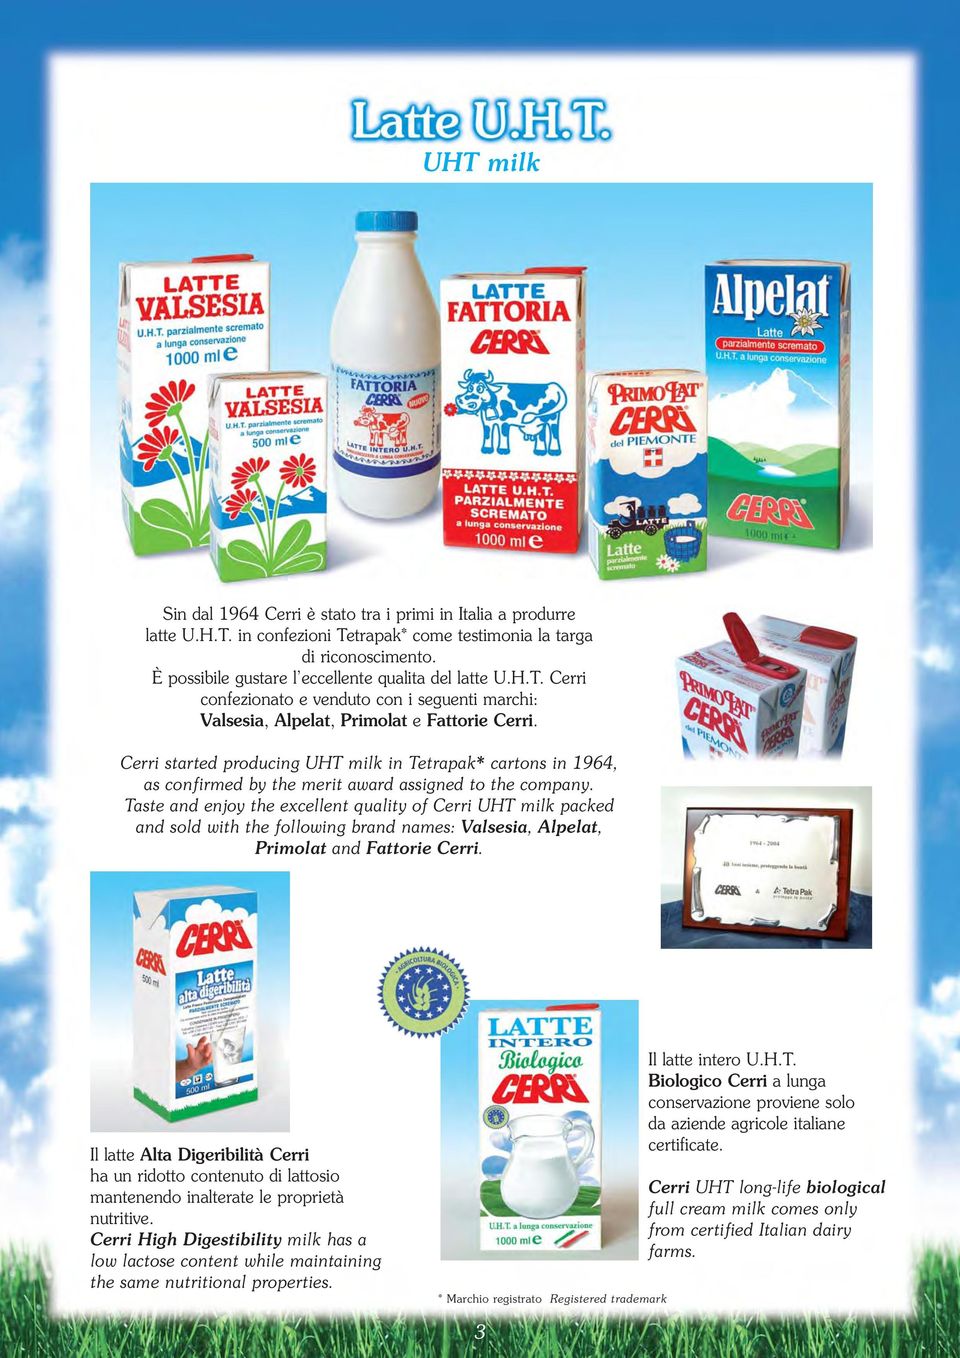 Cerri started producing UHT milk in Tetrapak* cartons in 1964, as confirmed by the merit award assigned to the company.